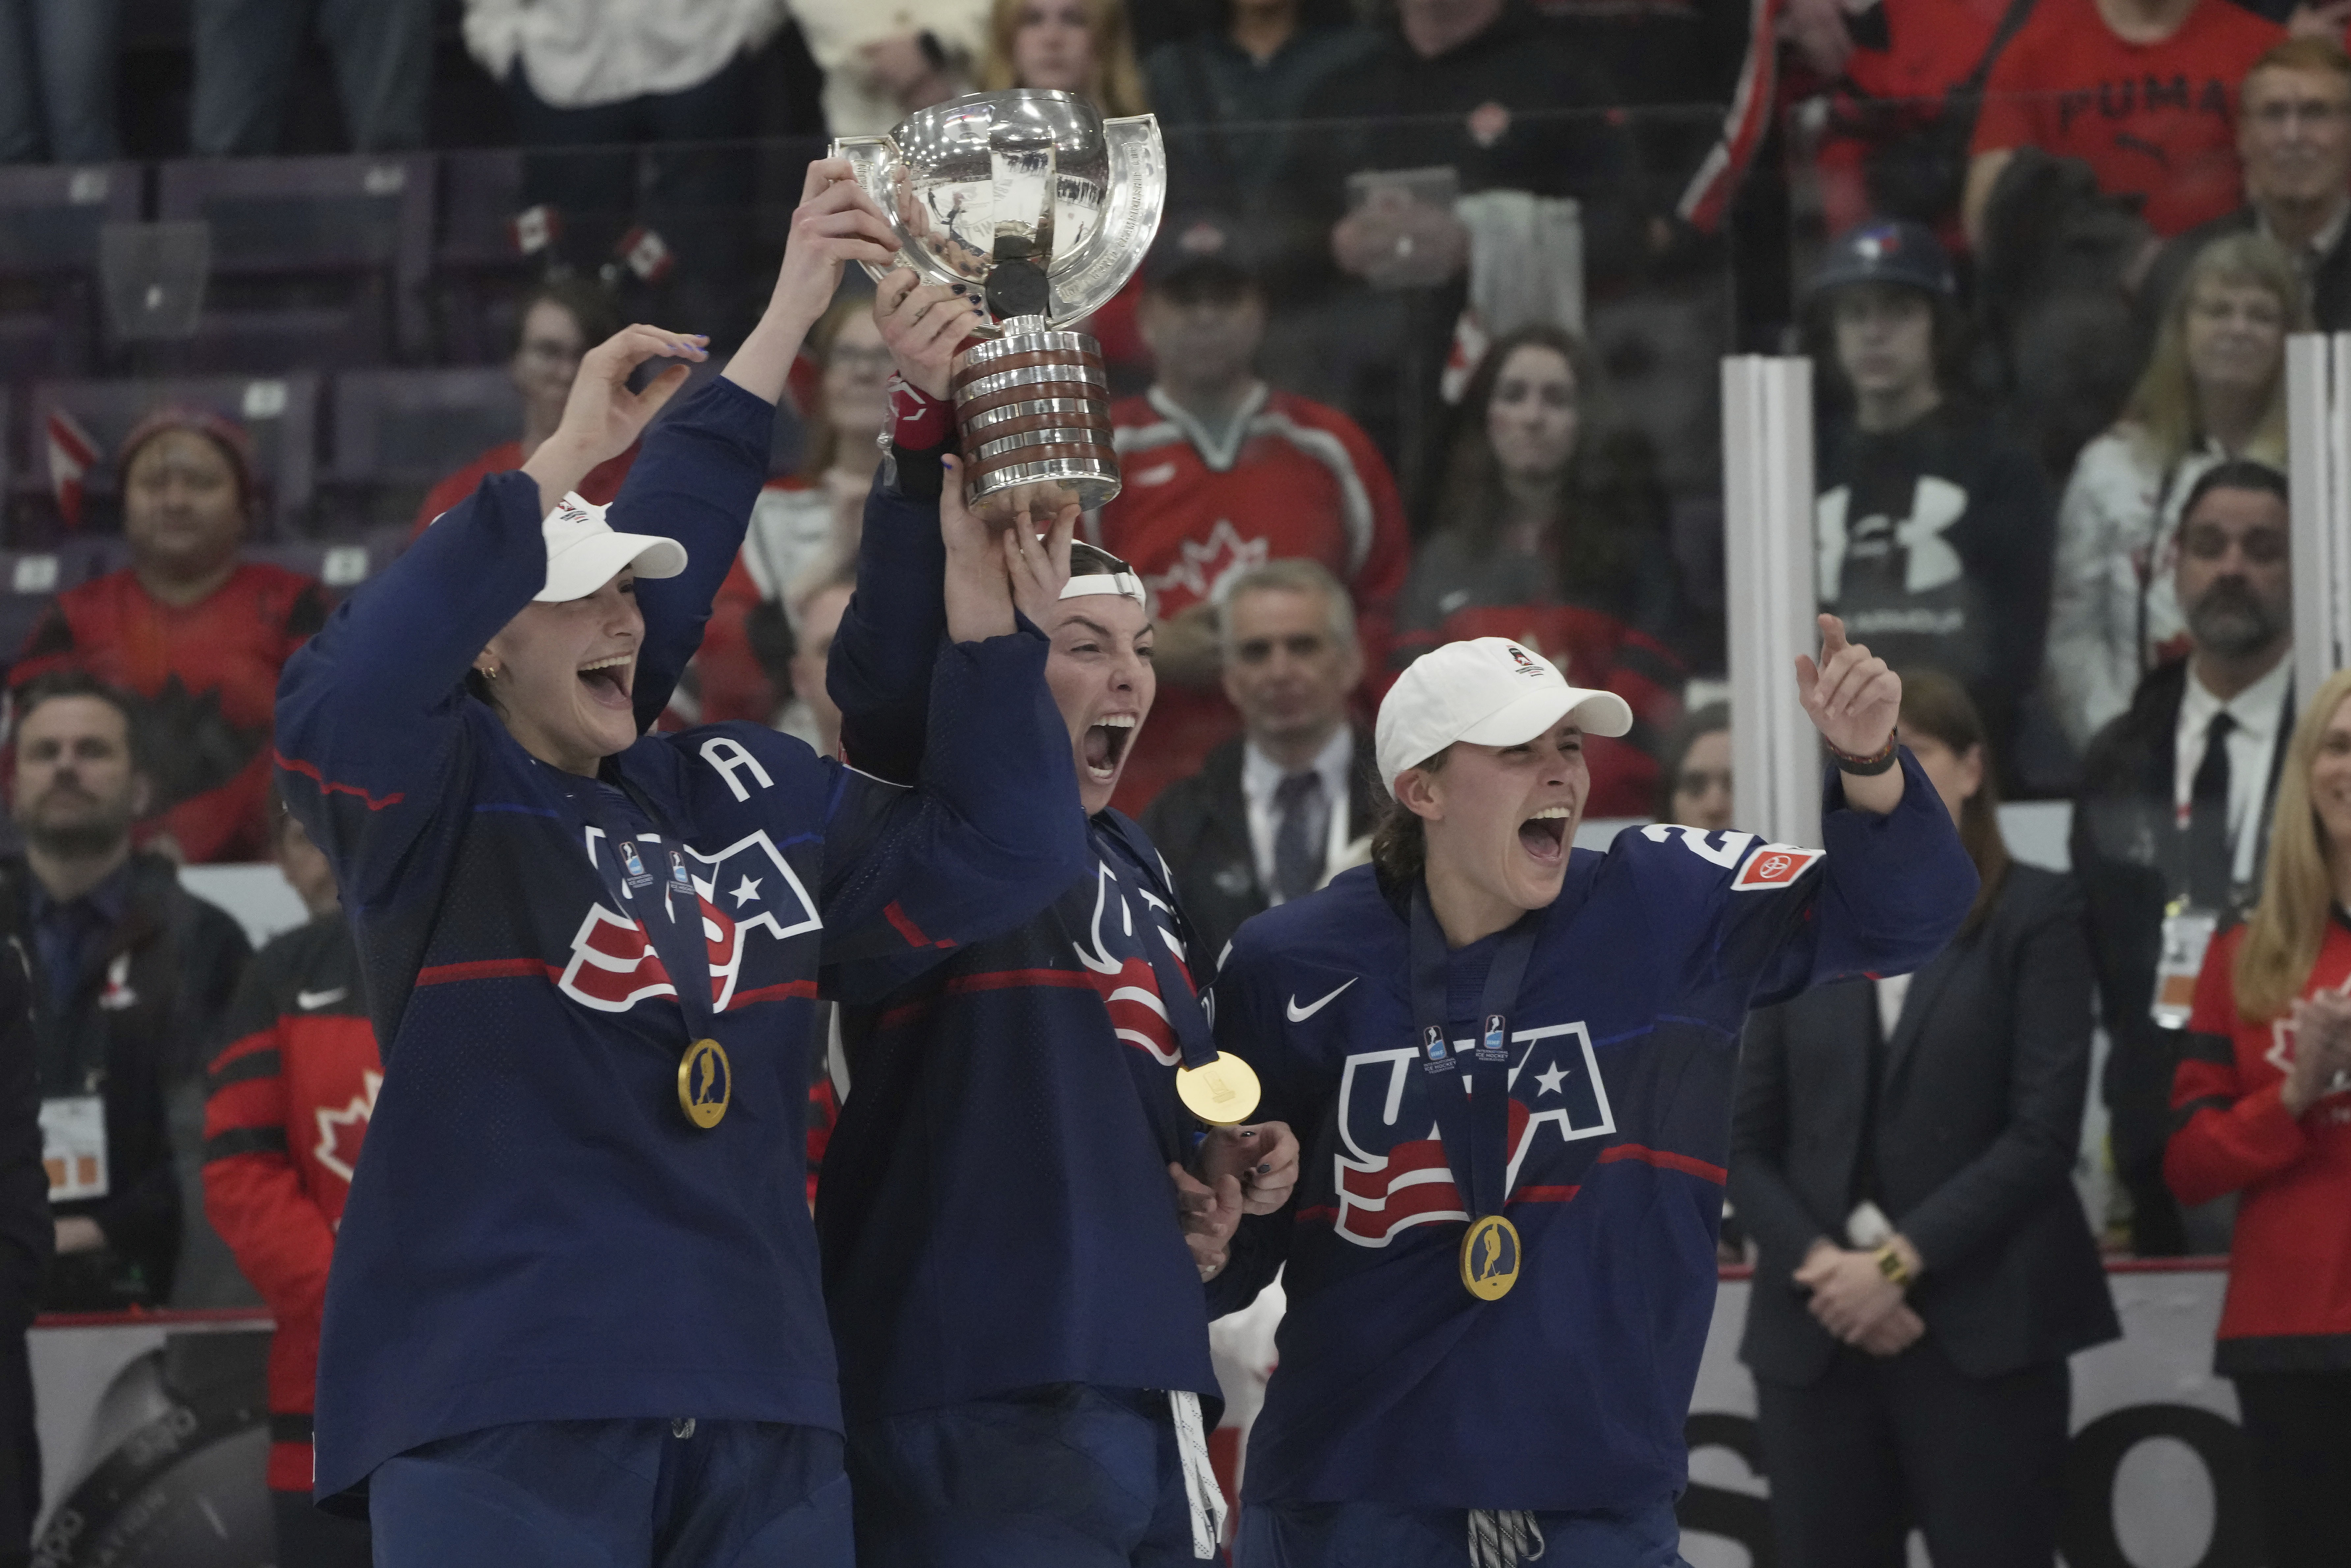 U.S. rallies to 4-3 shootout win over Canada in outdoor game